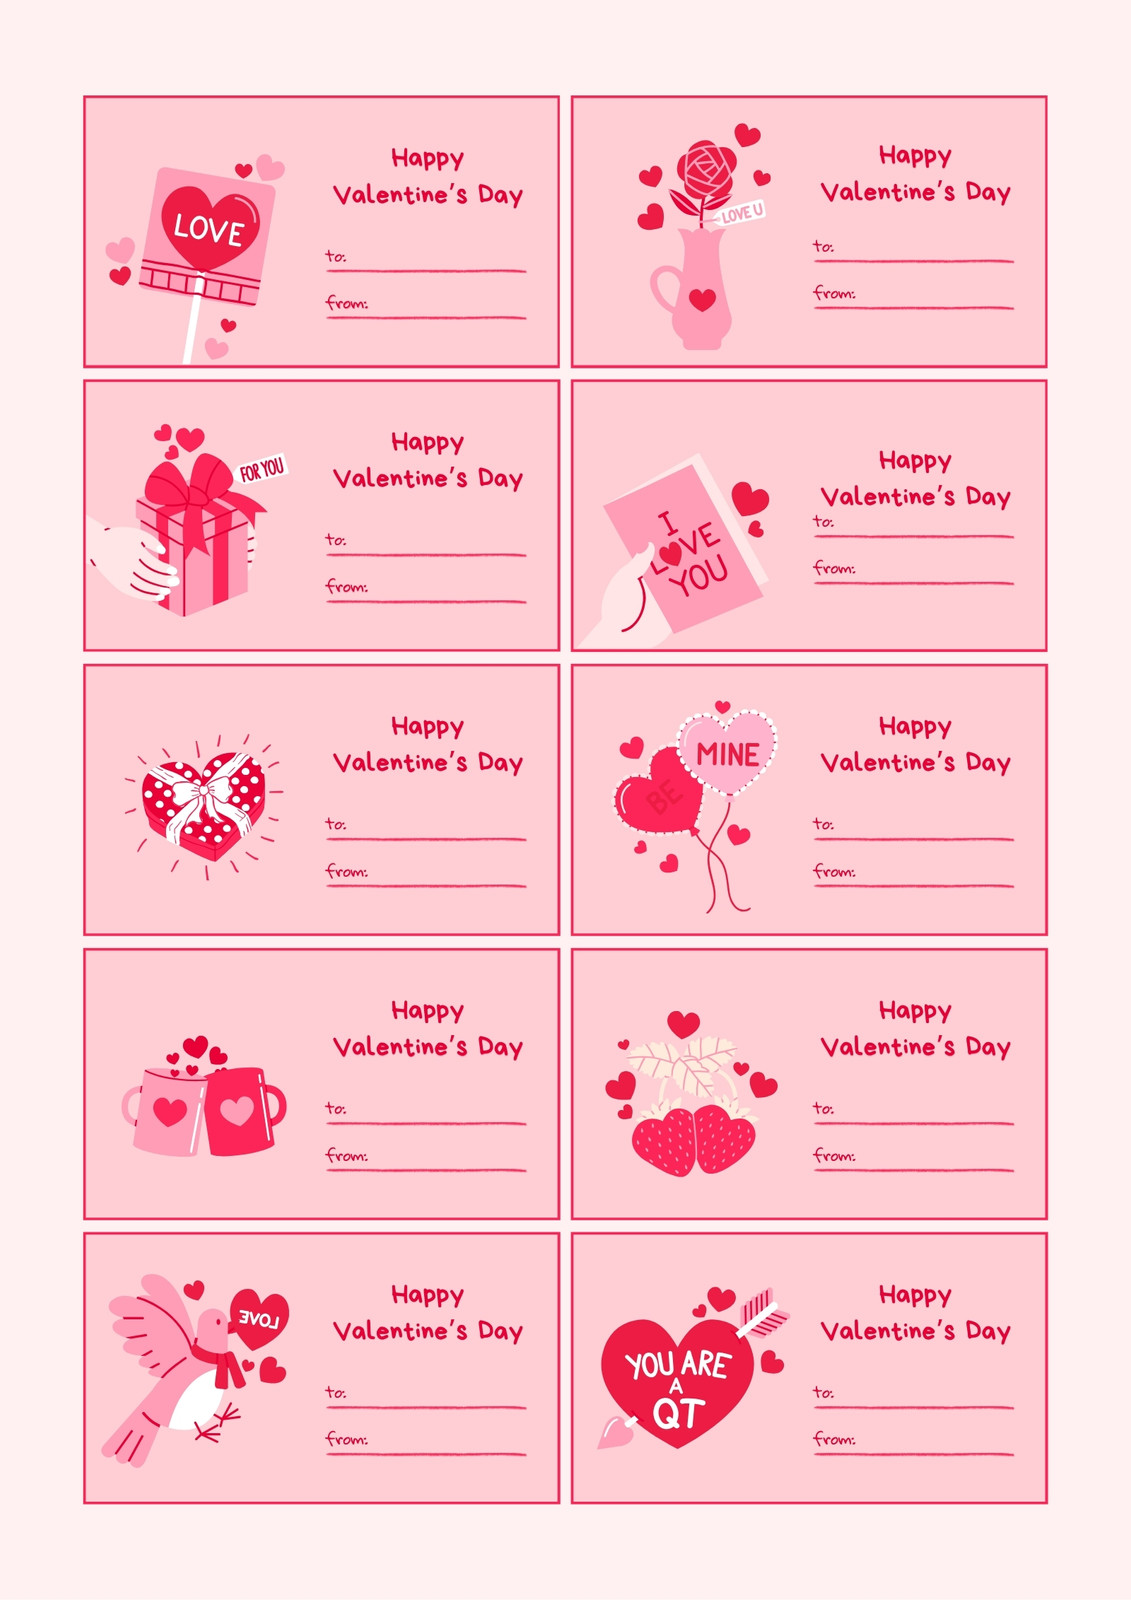 What are some Valentine's Day gifts that are creative, cheap, and easy? -  Quora